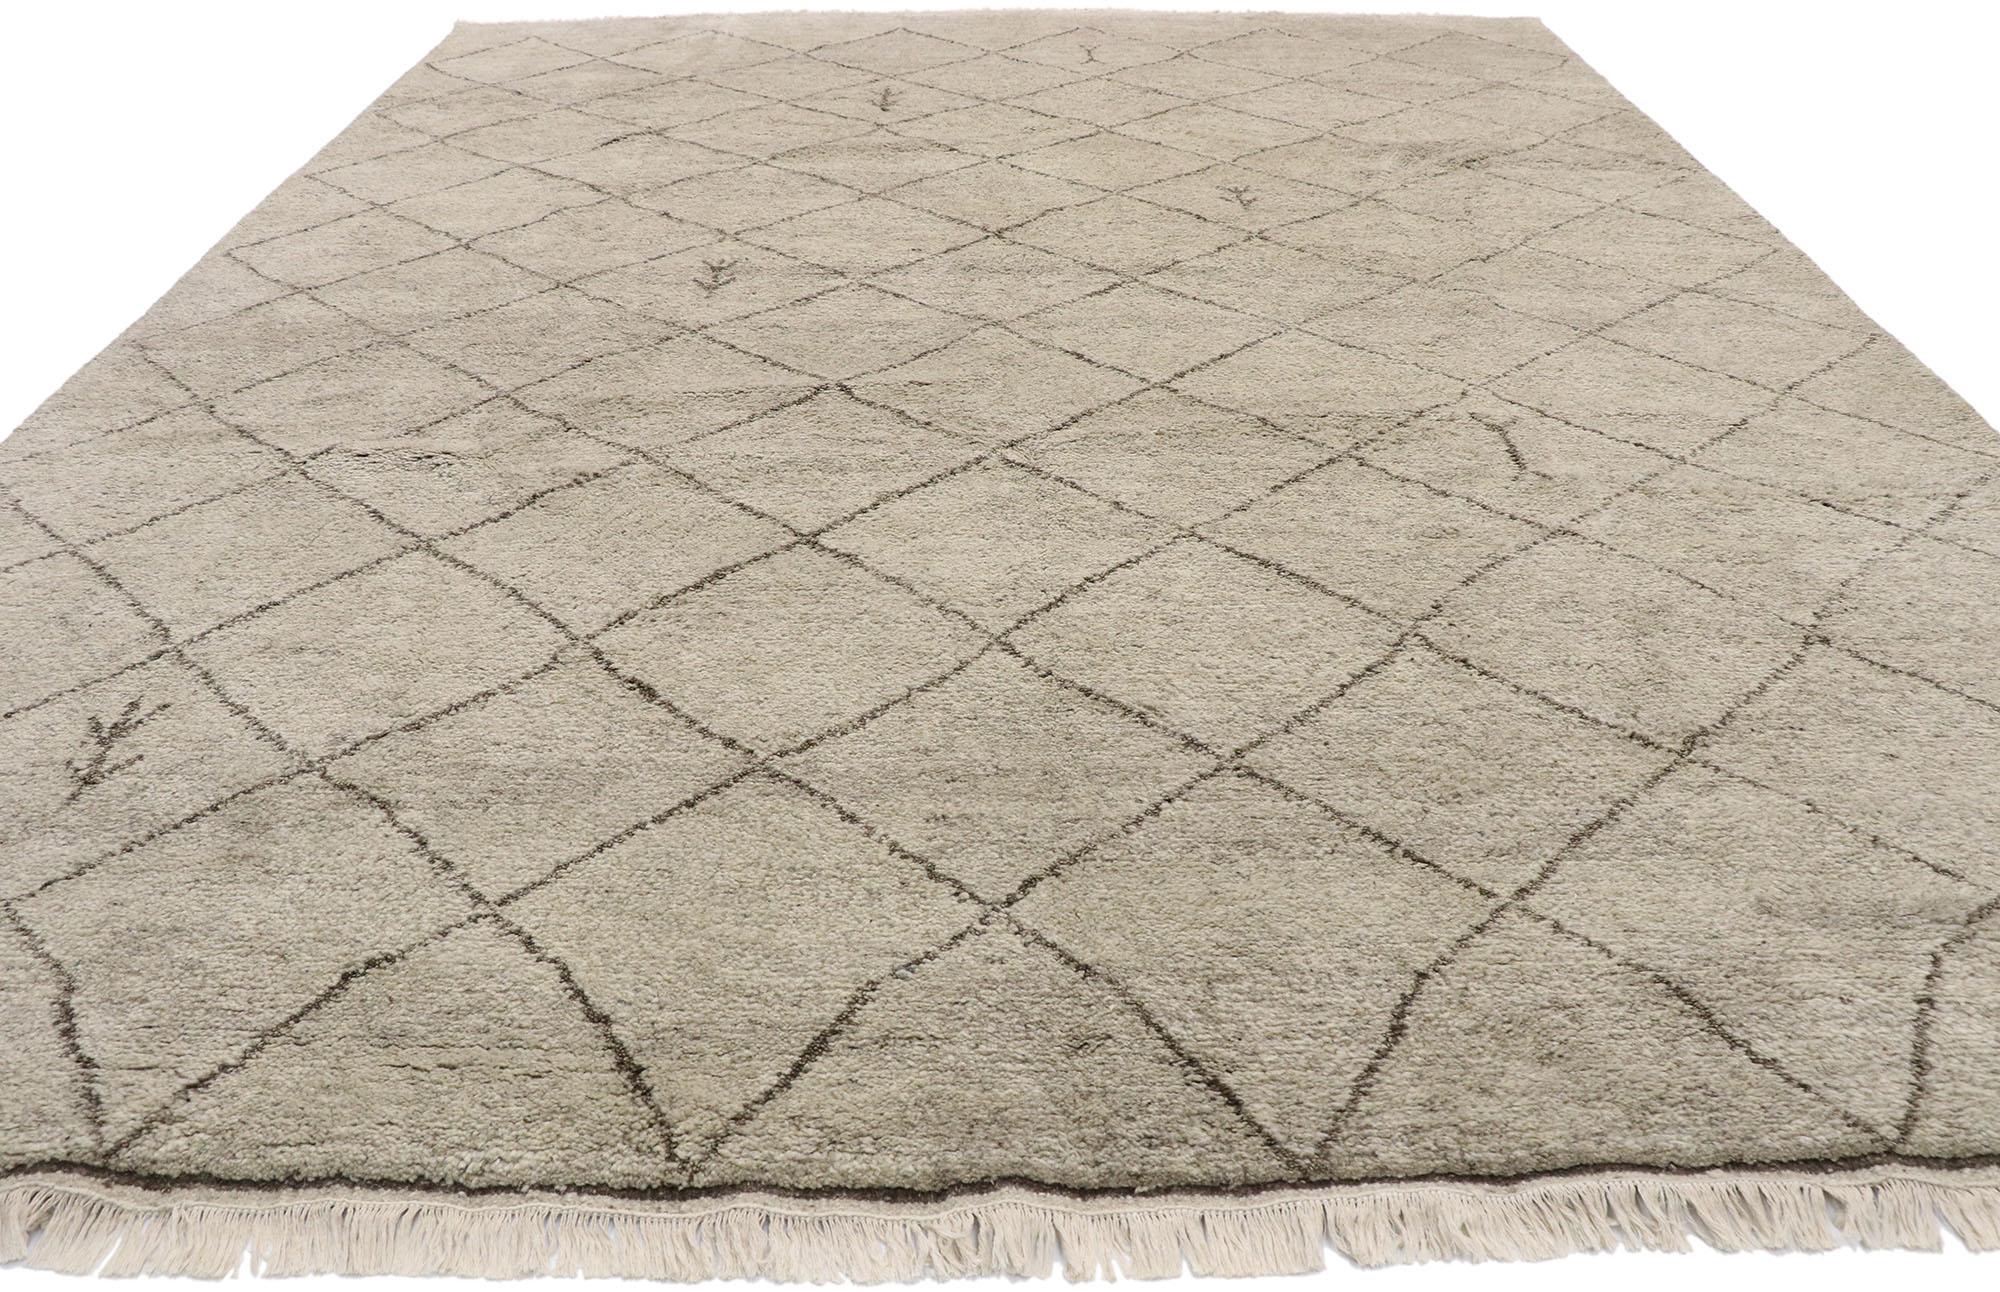 Indian Modern Earth-Tone Moroccan Area Rug, Sublime Simplicity Meets Nomadic Charm For Sale